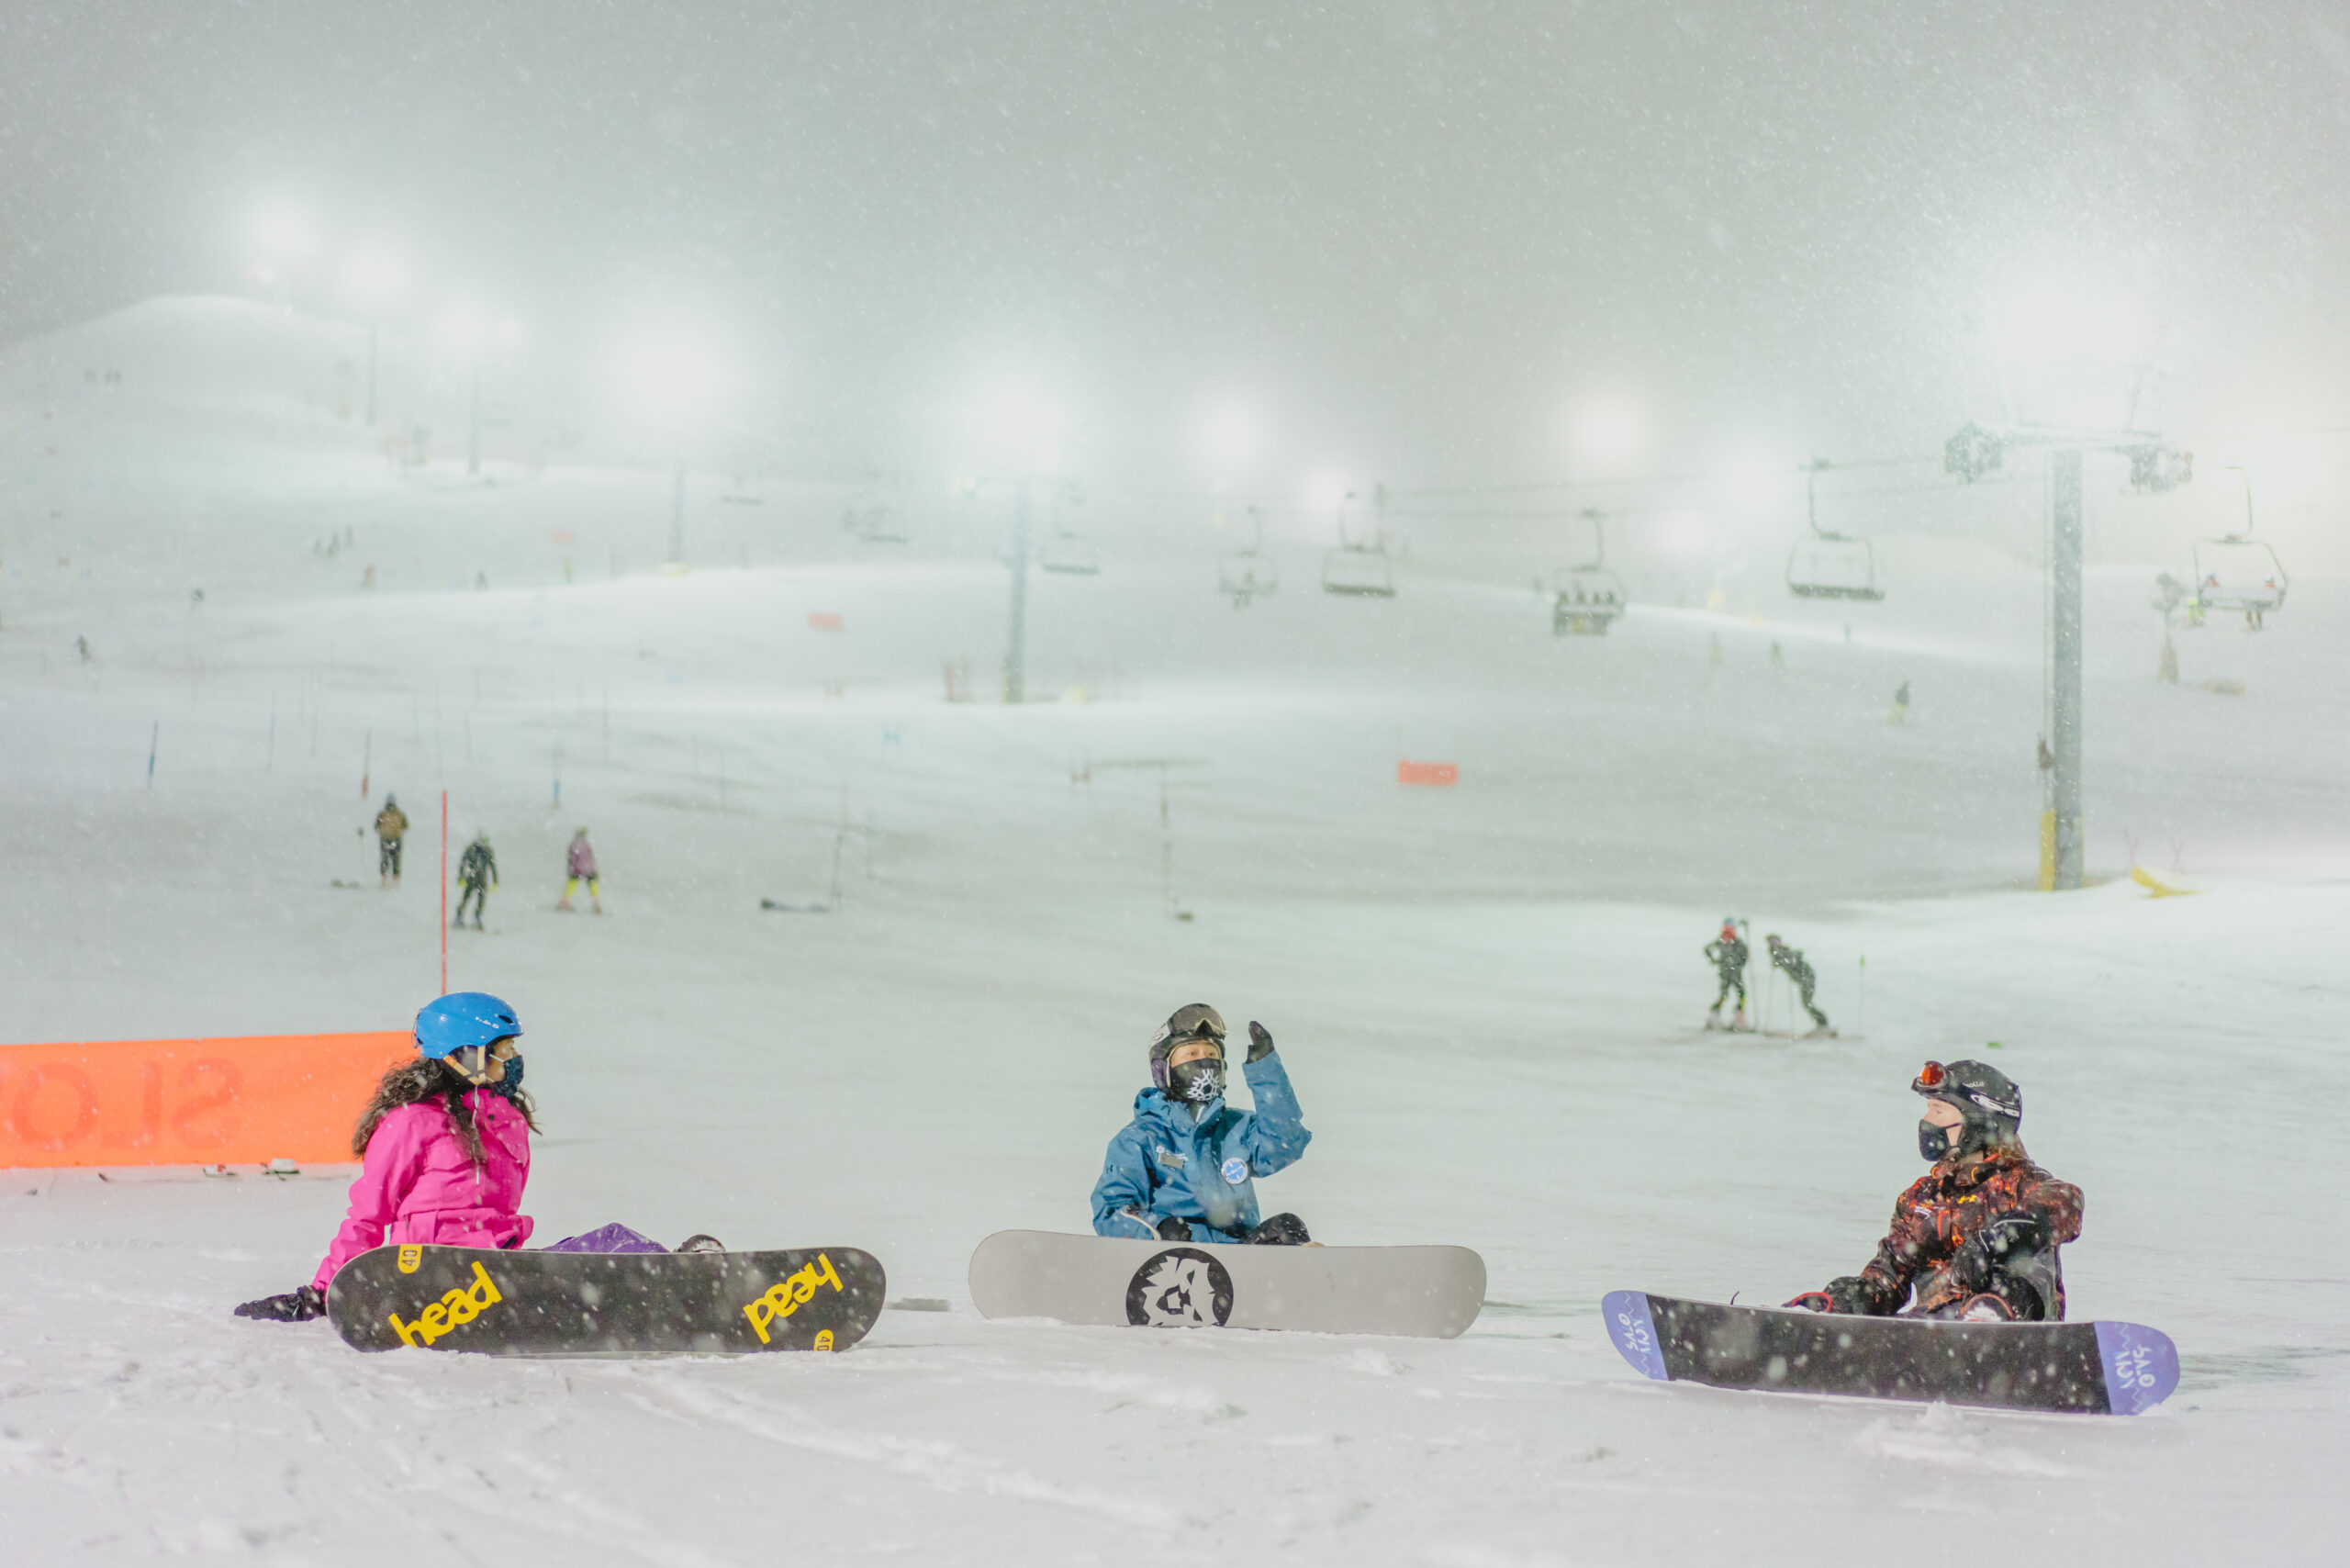 New Canadian loves the fresh air and energy of being on the ski slopes – #NewskiAB